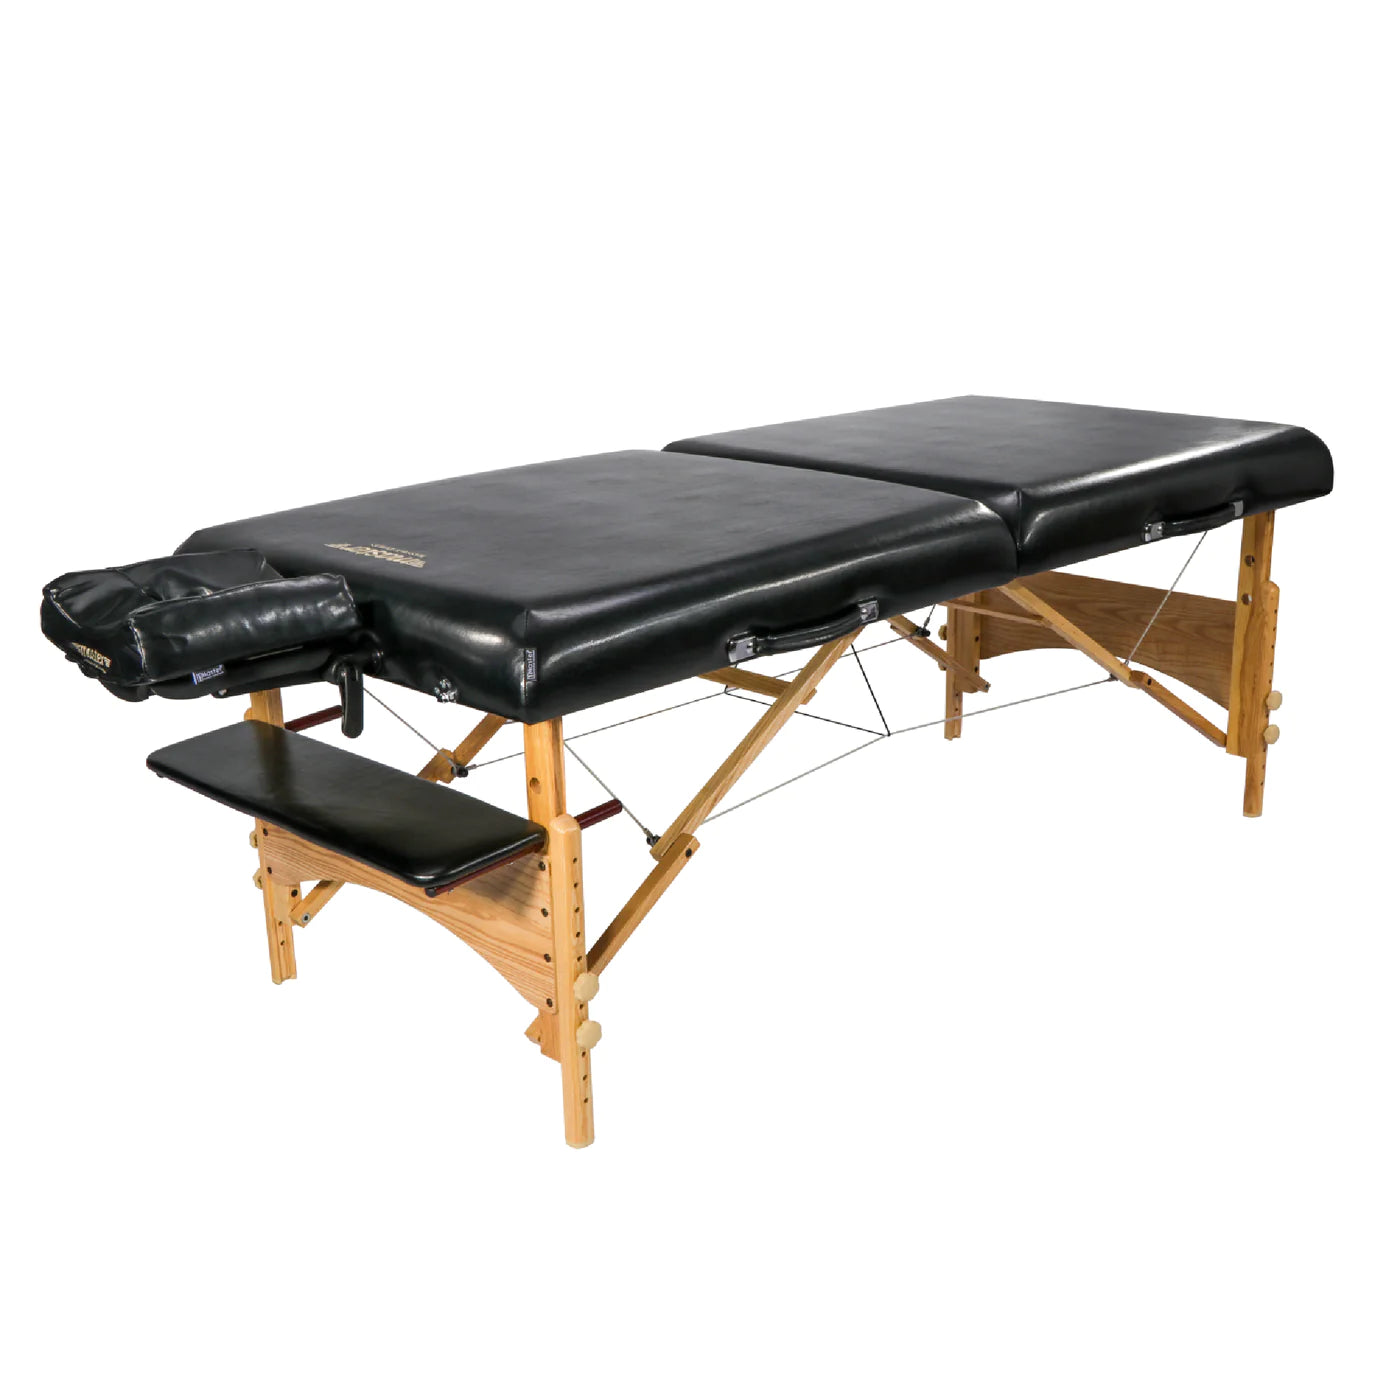 Spabodega 32" HUSKY GIBRALTAR™ XXL Portable Massage Table Package with Ambient Light System